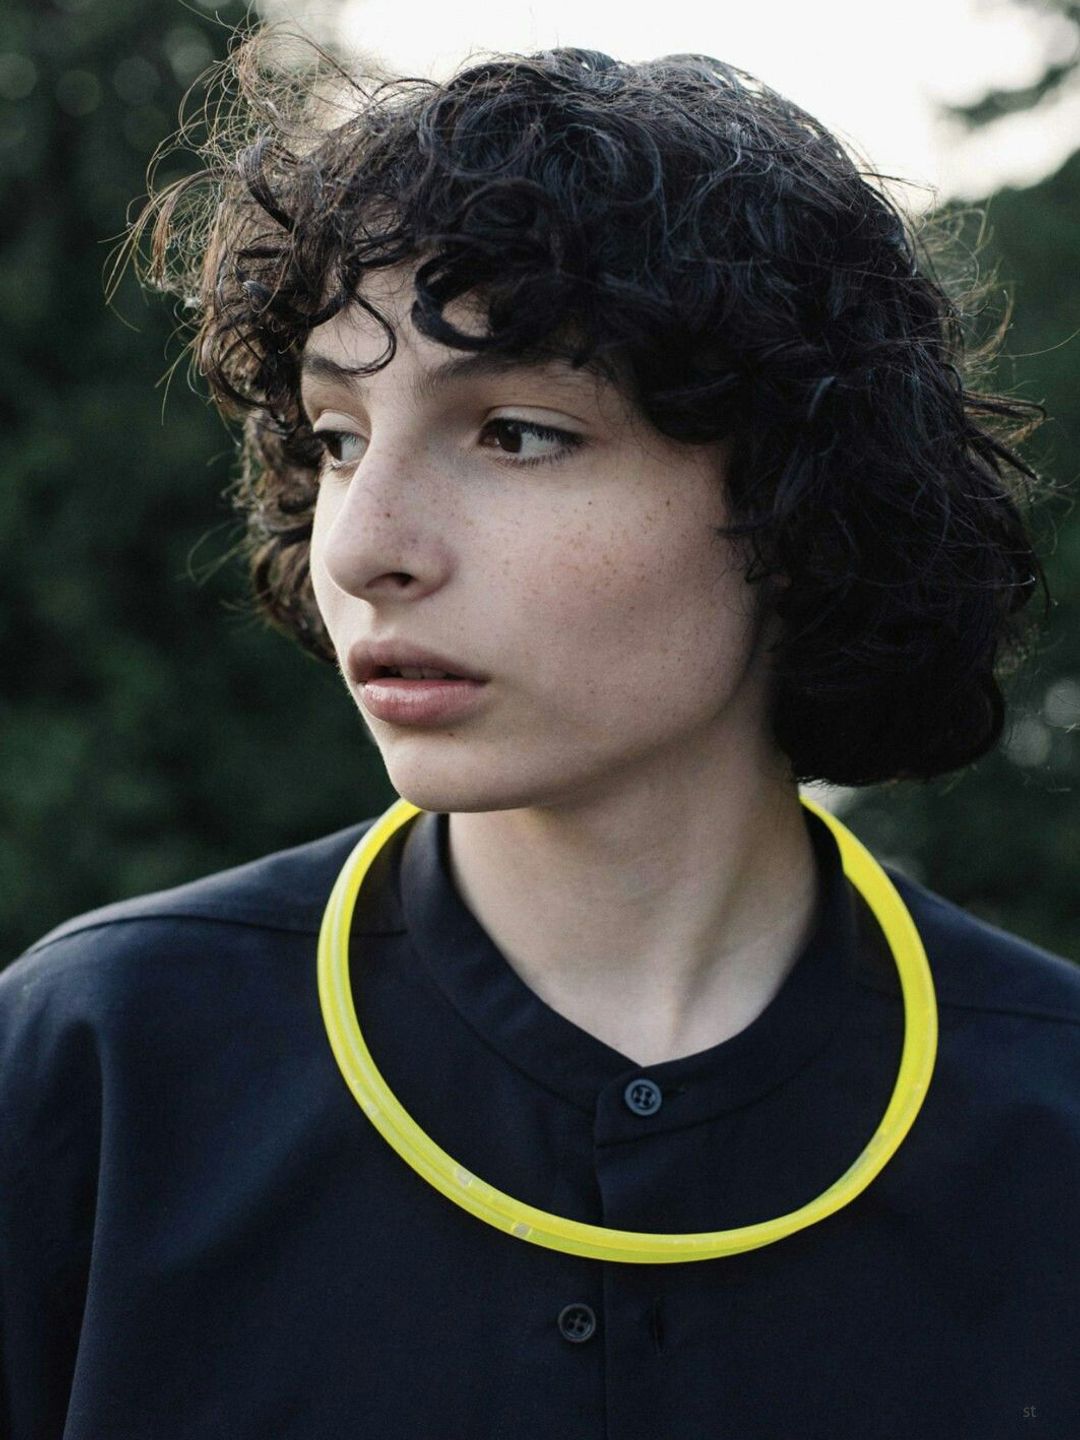 Finn Wolfhard does he have a wife